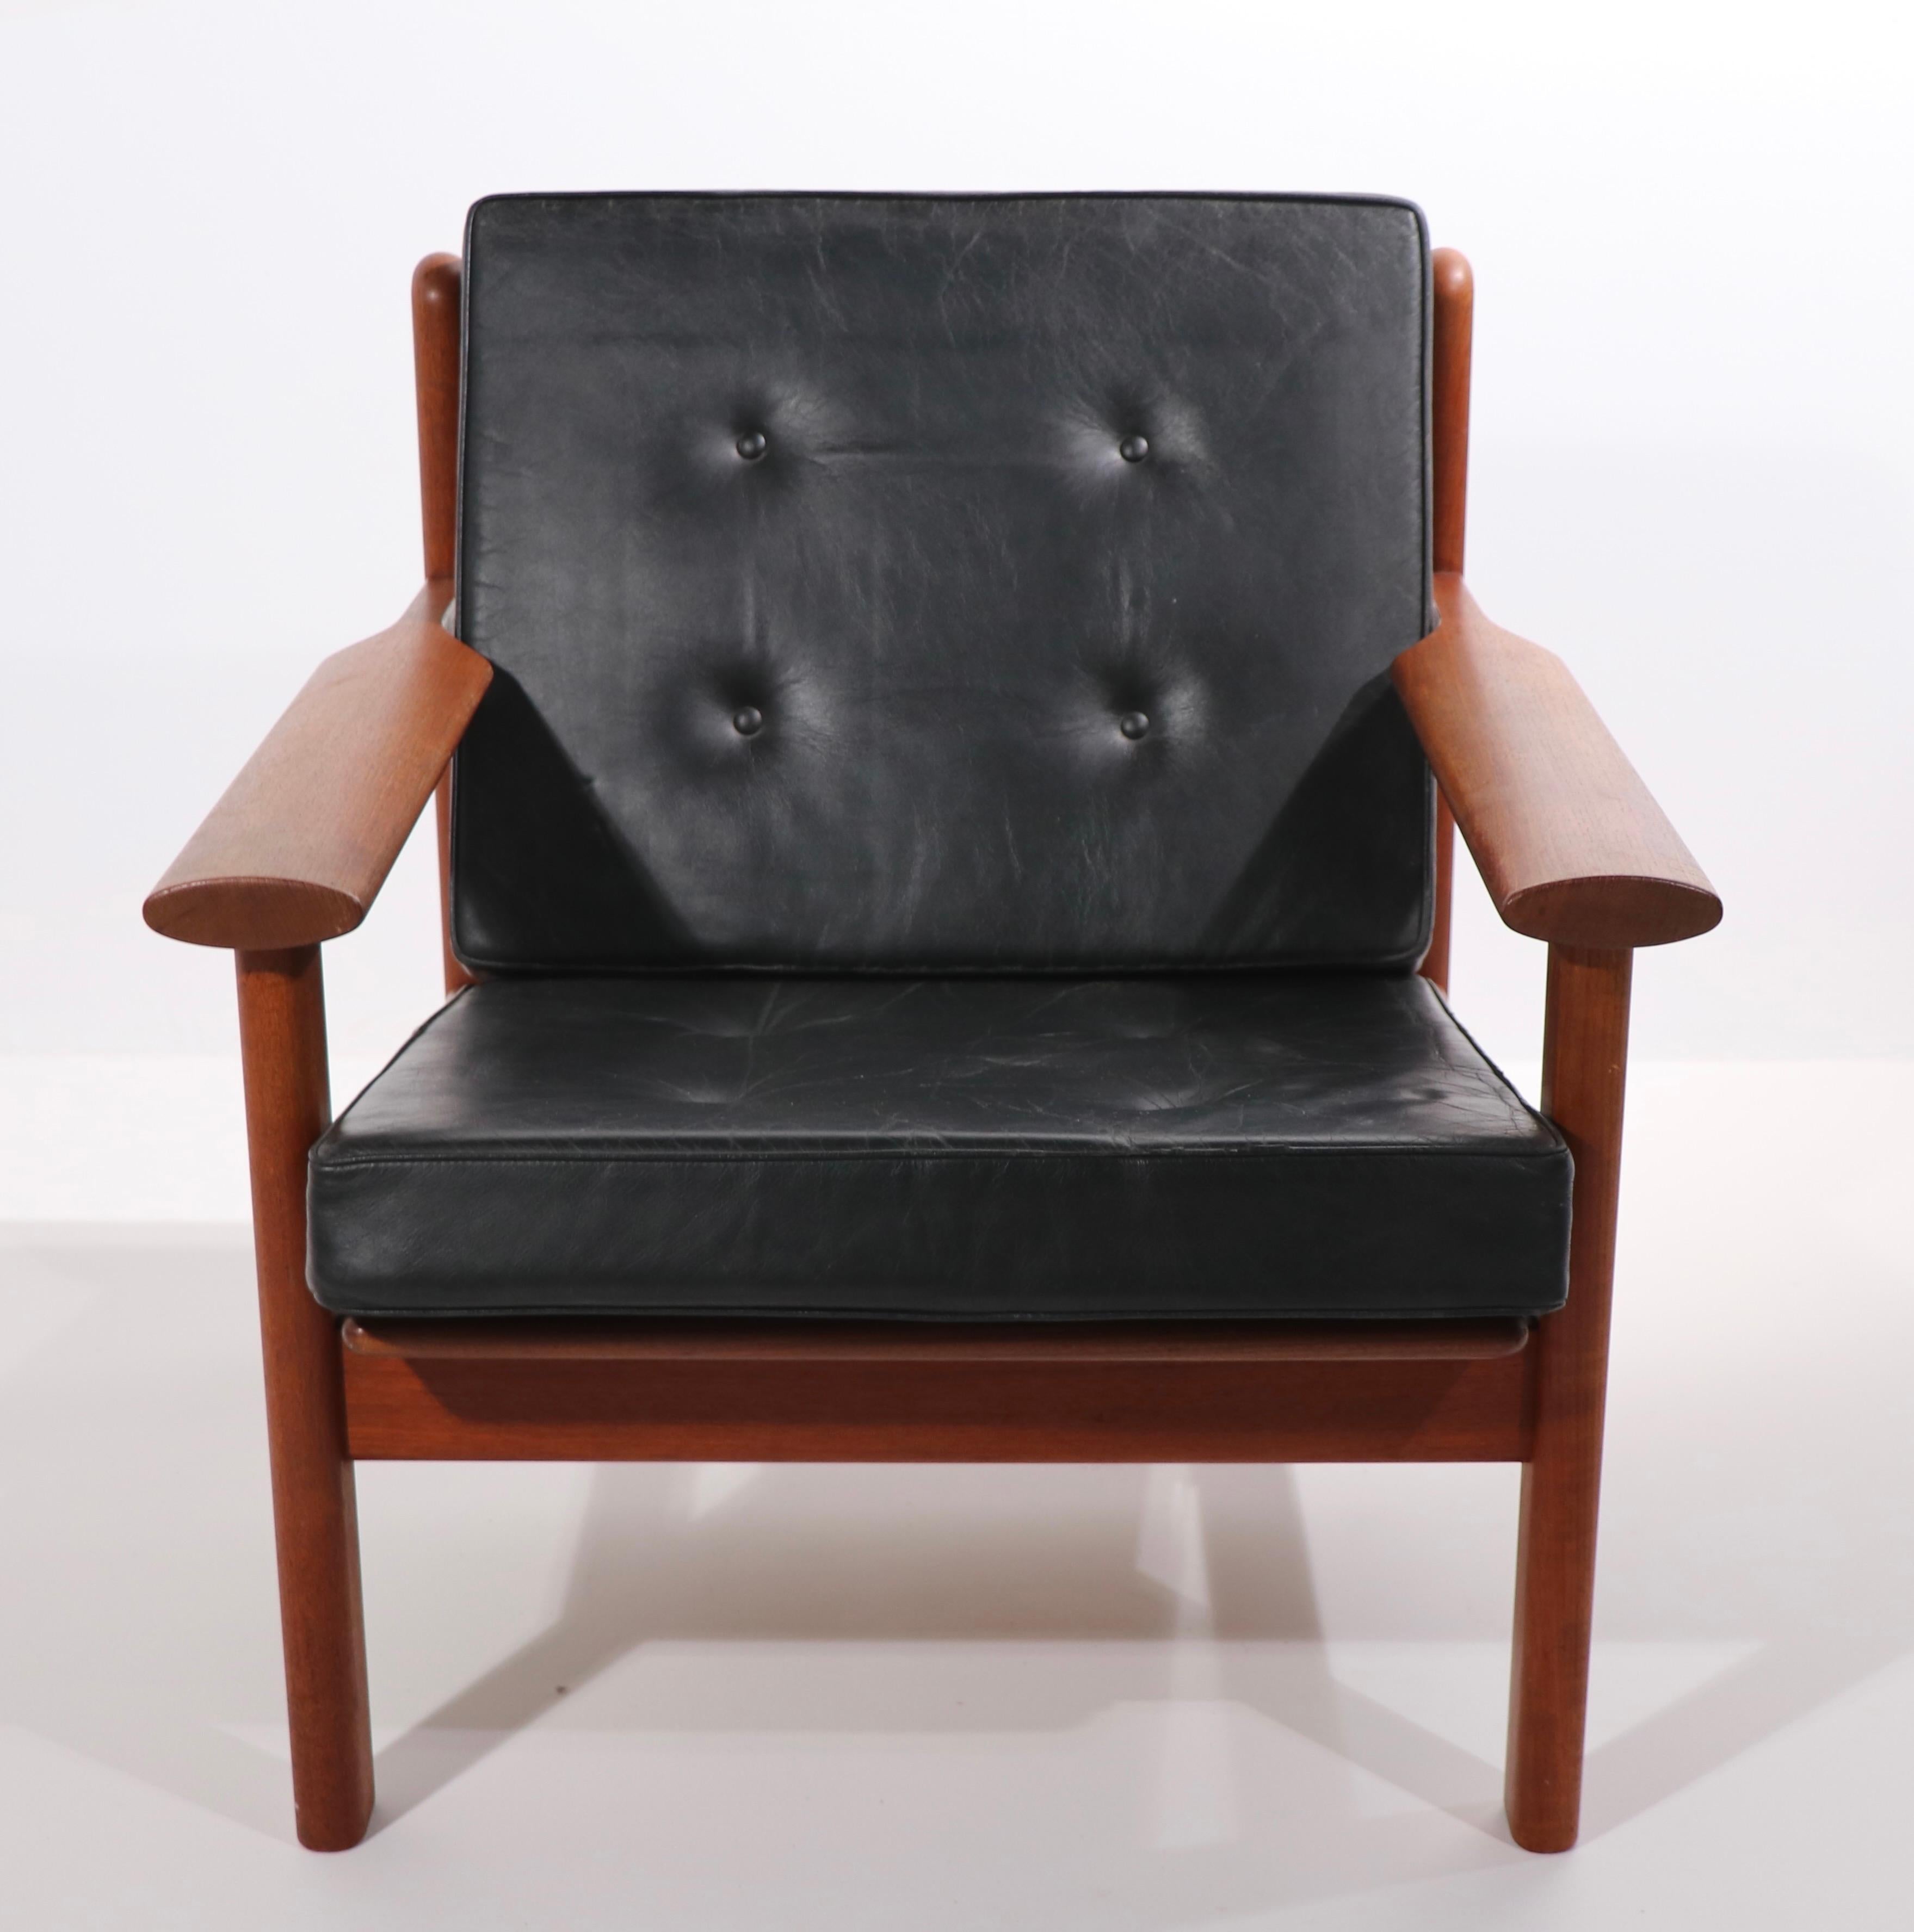 Exceptional pair of mid century Danish modern lounge chairs designed by Poull Volther for Frem Role circa 1950's. These chairs are in very fine, original condition, showing only minor cosmetic wear, normal and consistent with age. The frames are of